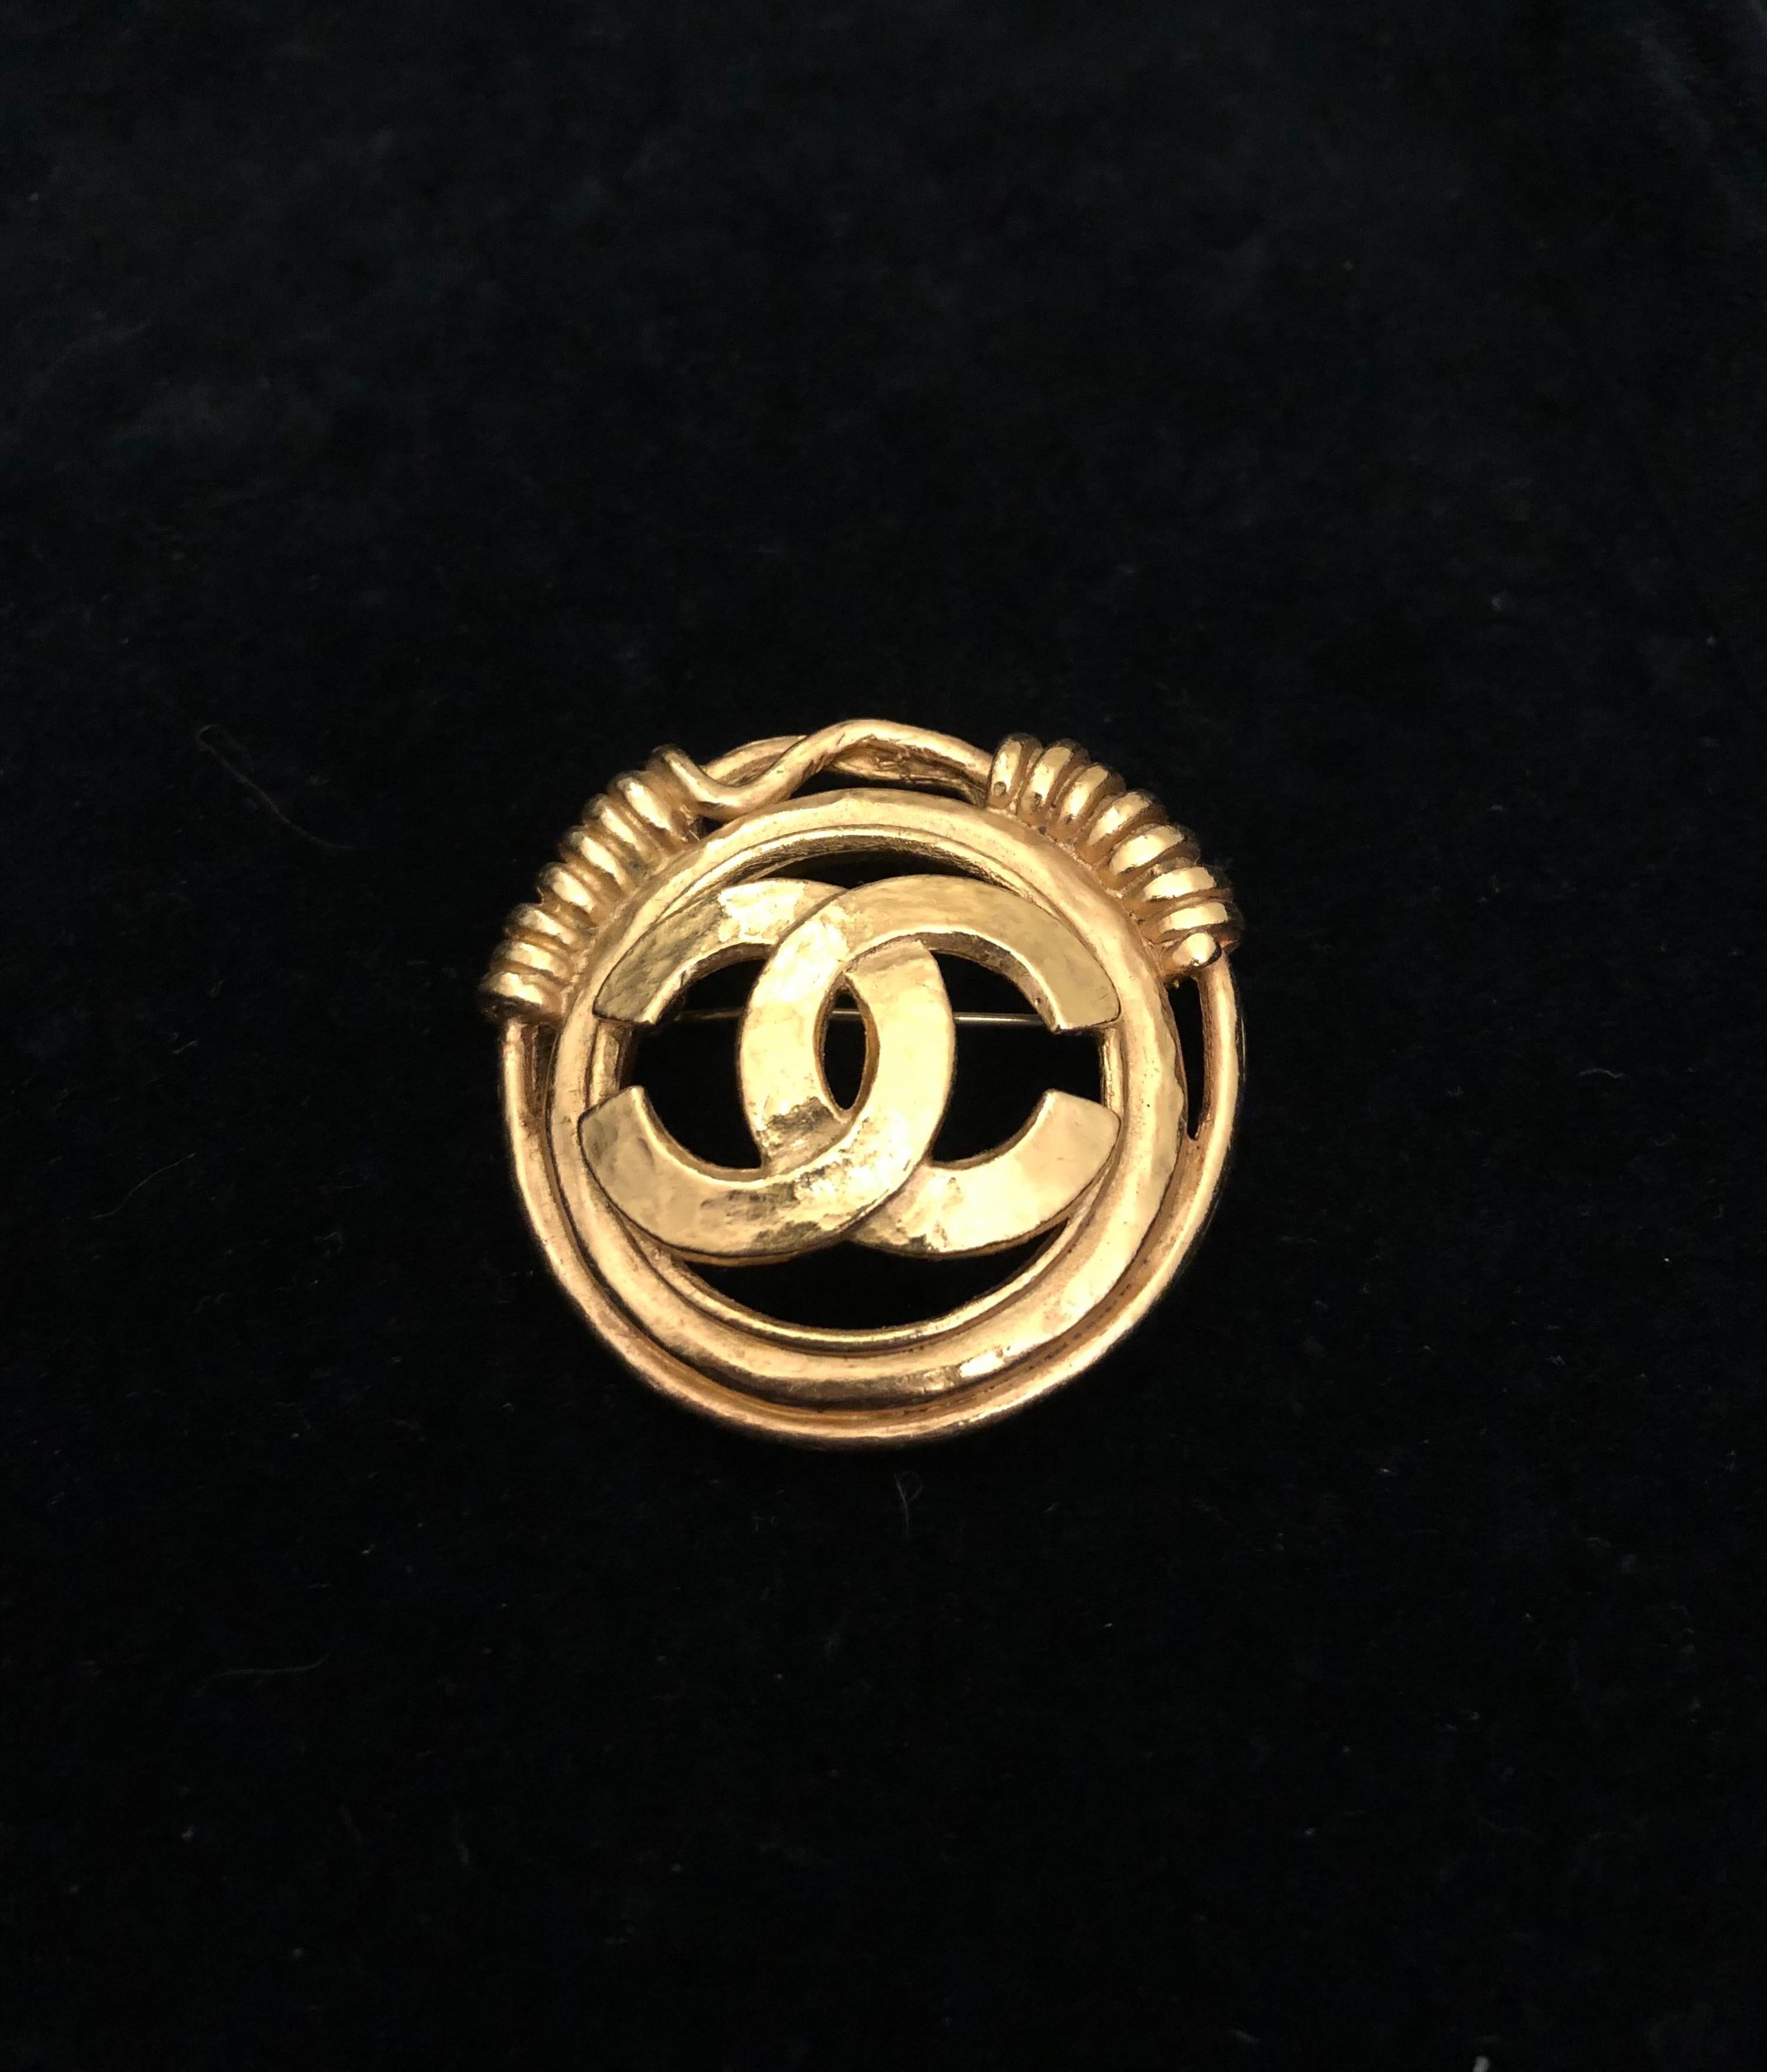 1990s Chanel gold toned brooch featuring a CC logo surrounded by a gold toned coiled ring. Stamped 94P made in France. Measures approximately 4.3 cm in diameter. Comes with box. 

Condition: Minor signs of wear. Generally in very good condition.